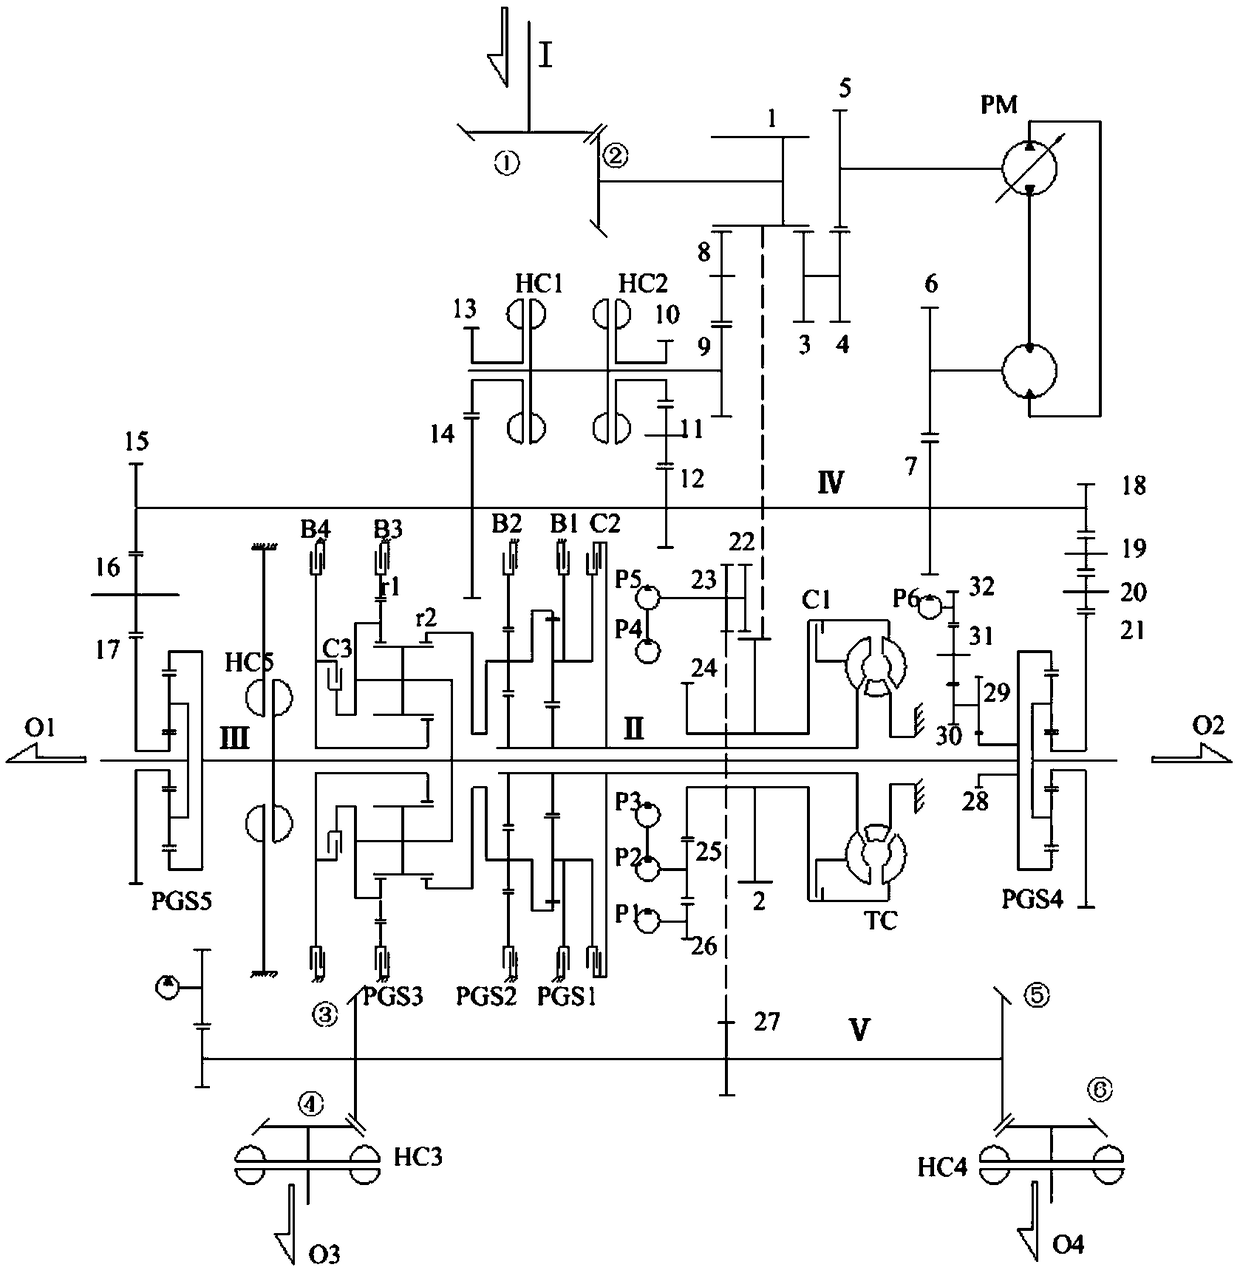 Hydro-mechanical compound multi-power flow transmission device